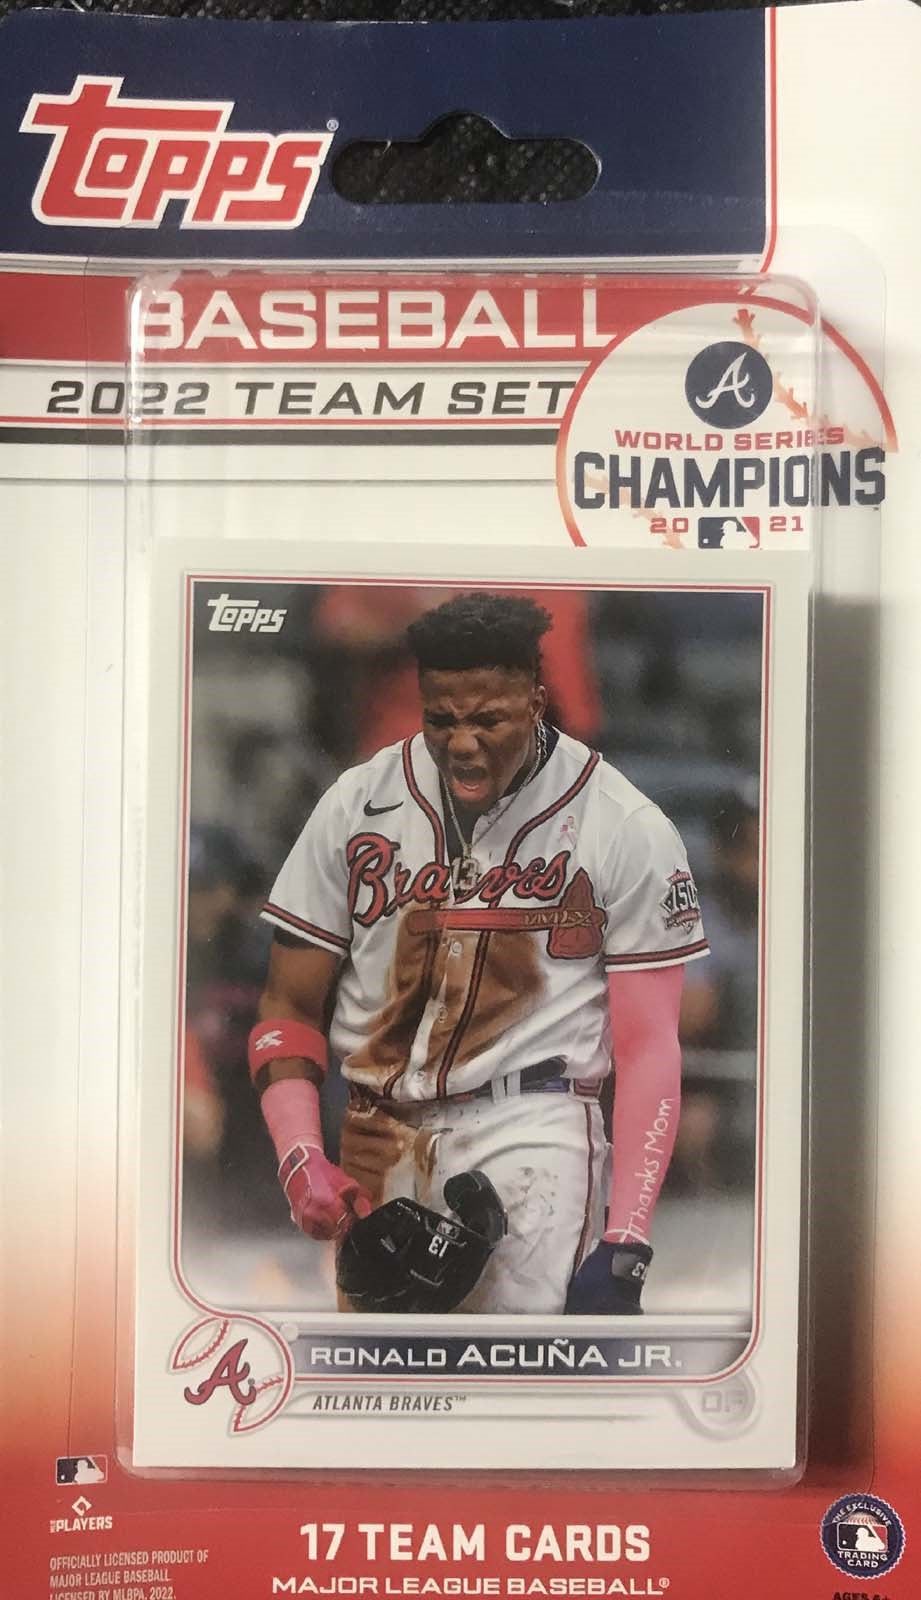  2020 Topps Factory Team Set #BOS-17 Tessie Boston Red Sox  Baseball Card : Collectibles & Fine Art